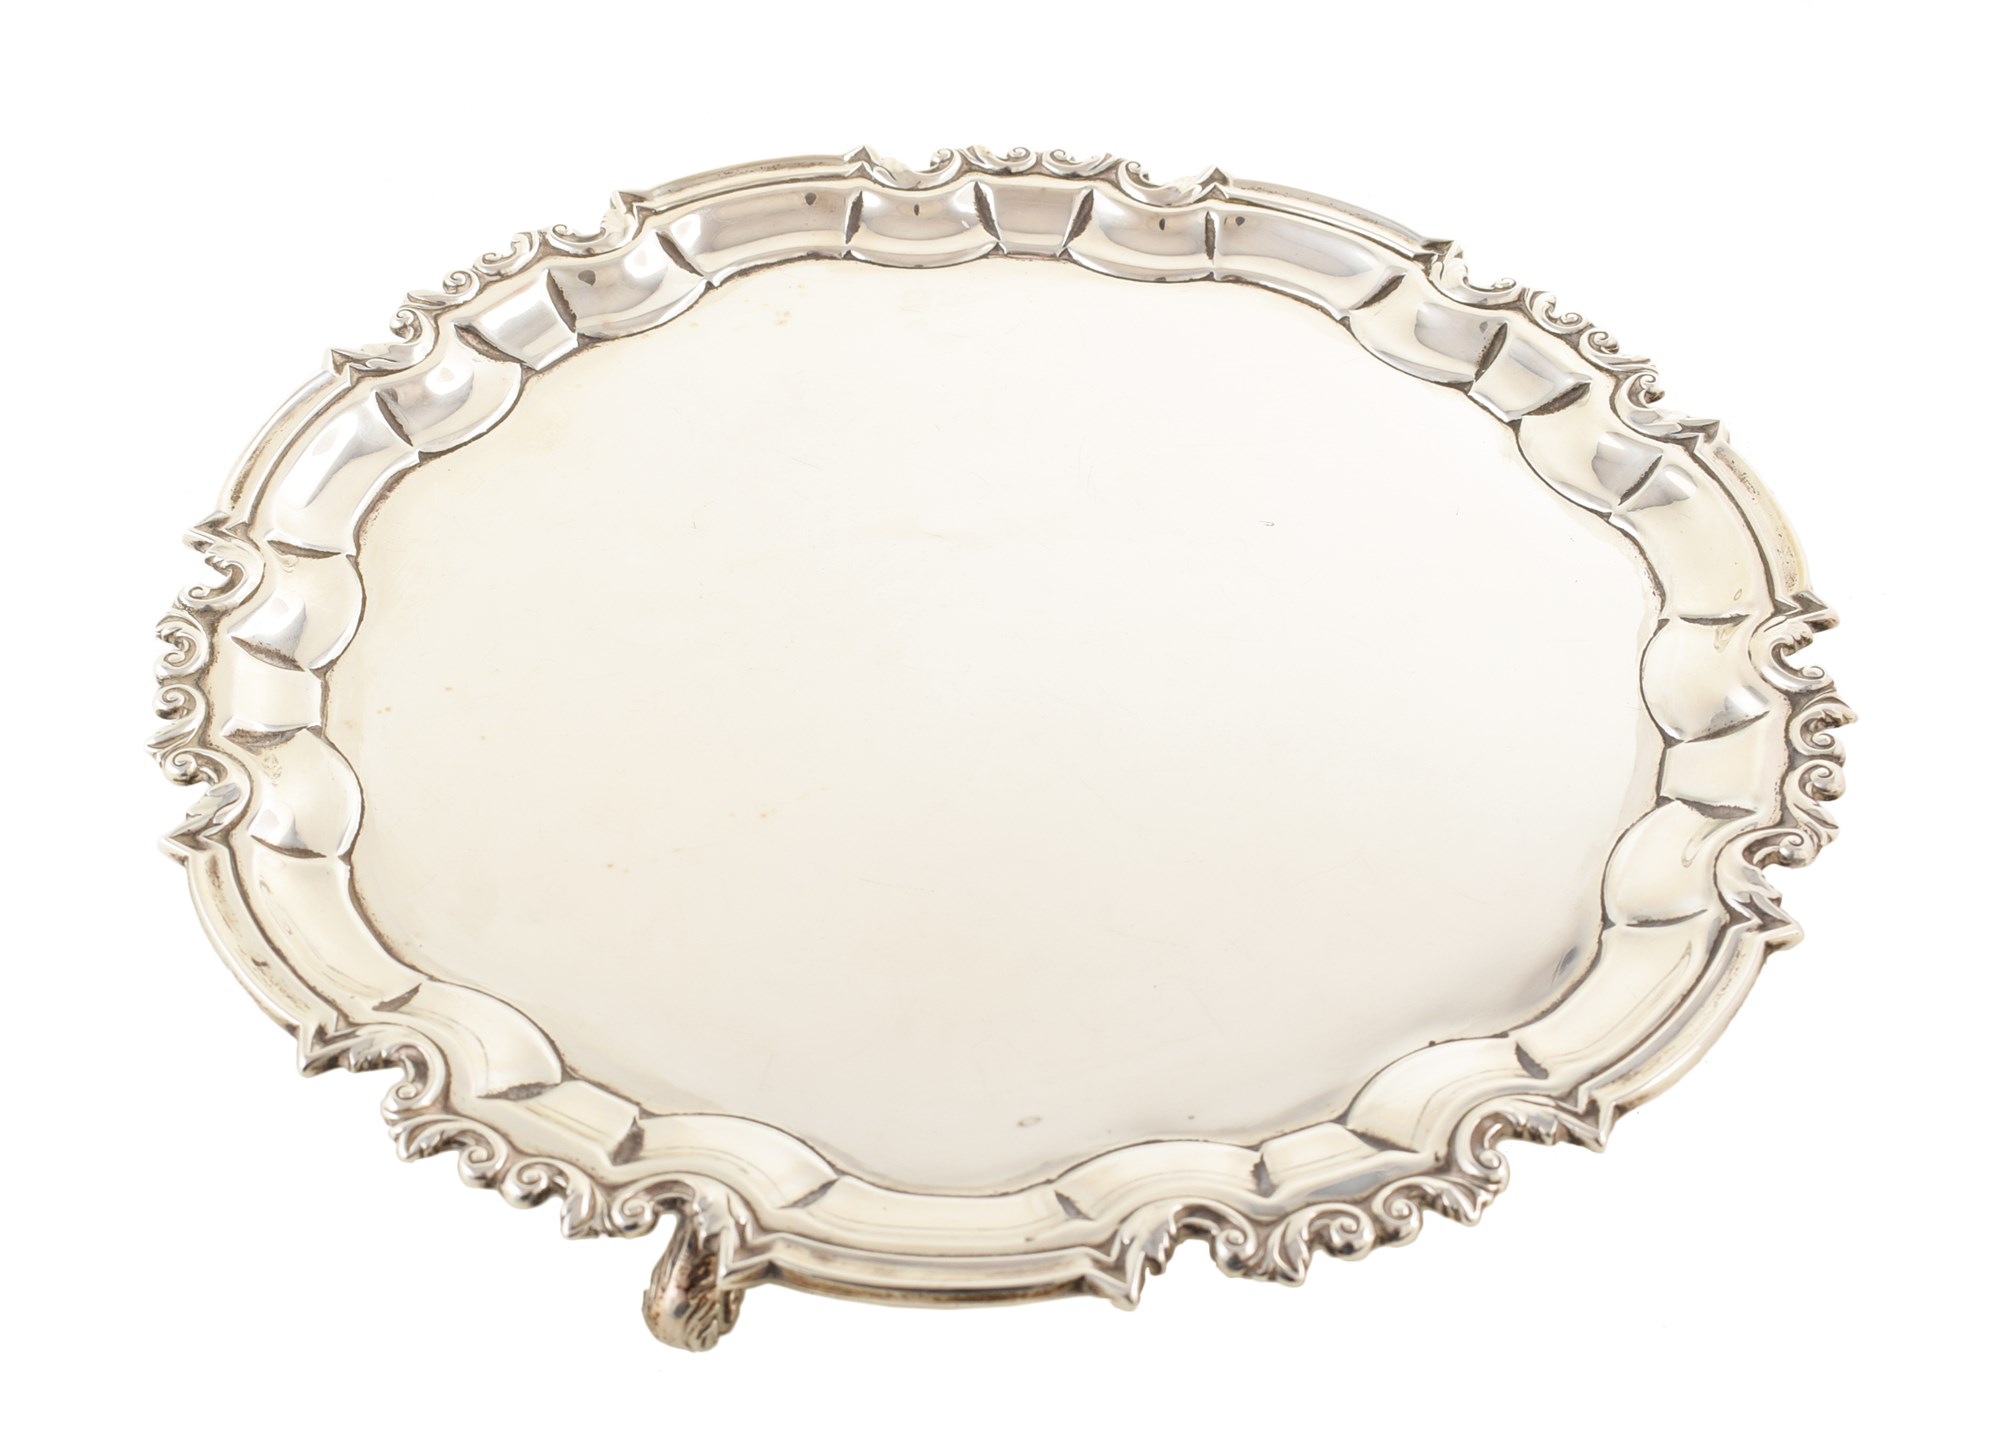 Circular silver salver by William Hutton & Sons , plain polished with chippendale border on 3